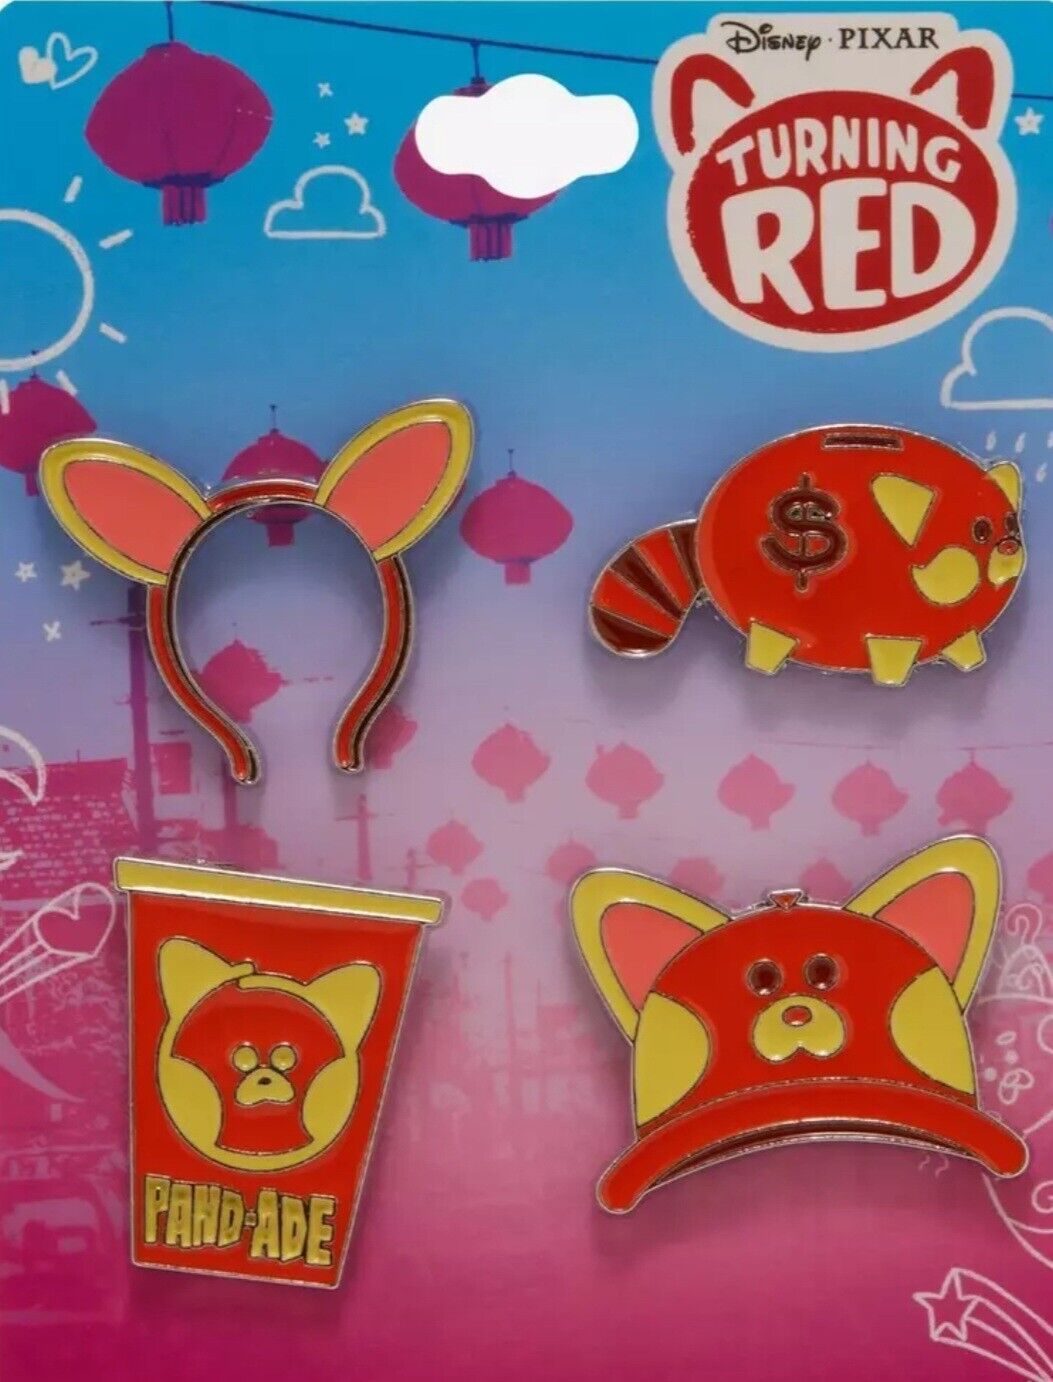 Disney Pixar Turning Red Collectors Enamel Pin Set New On Card 4pc Neon Tuesday